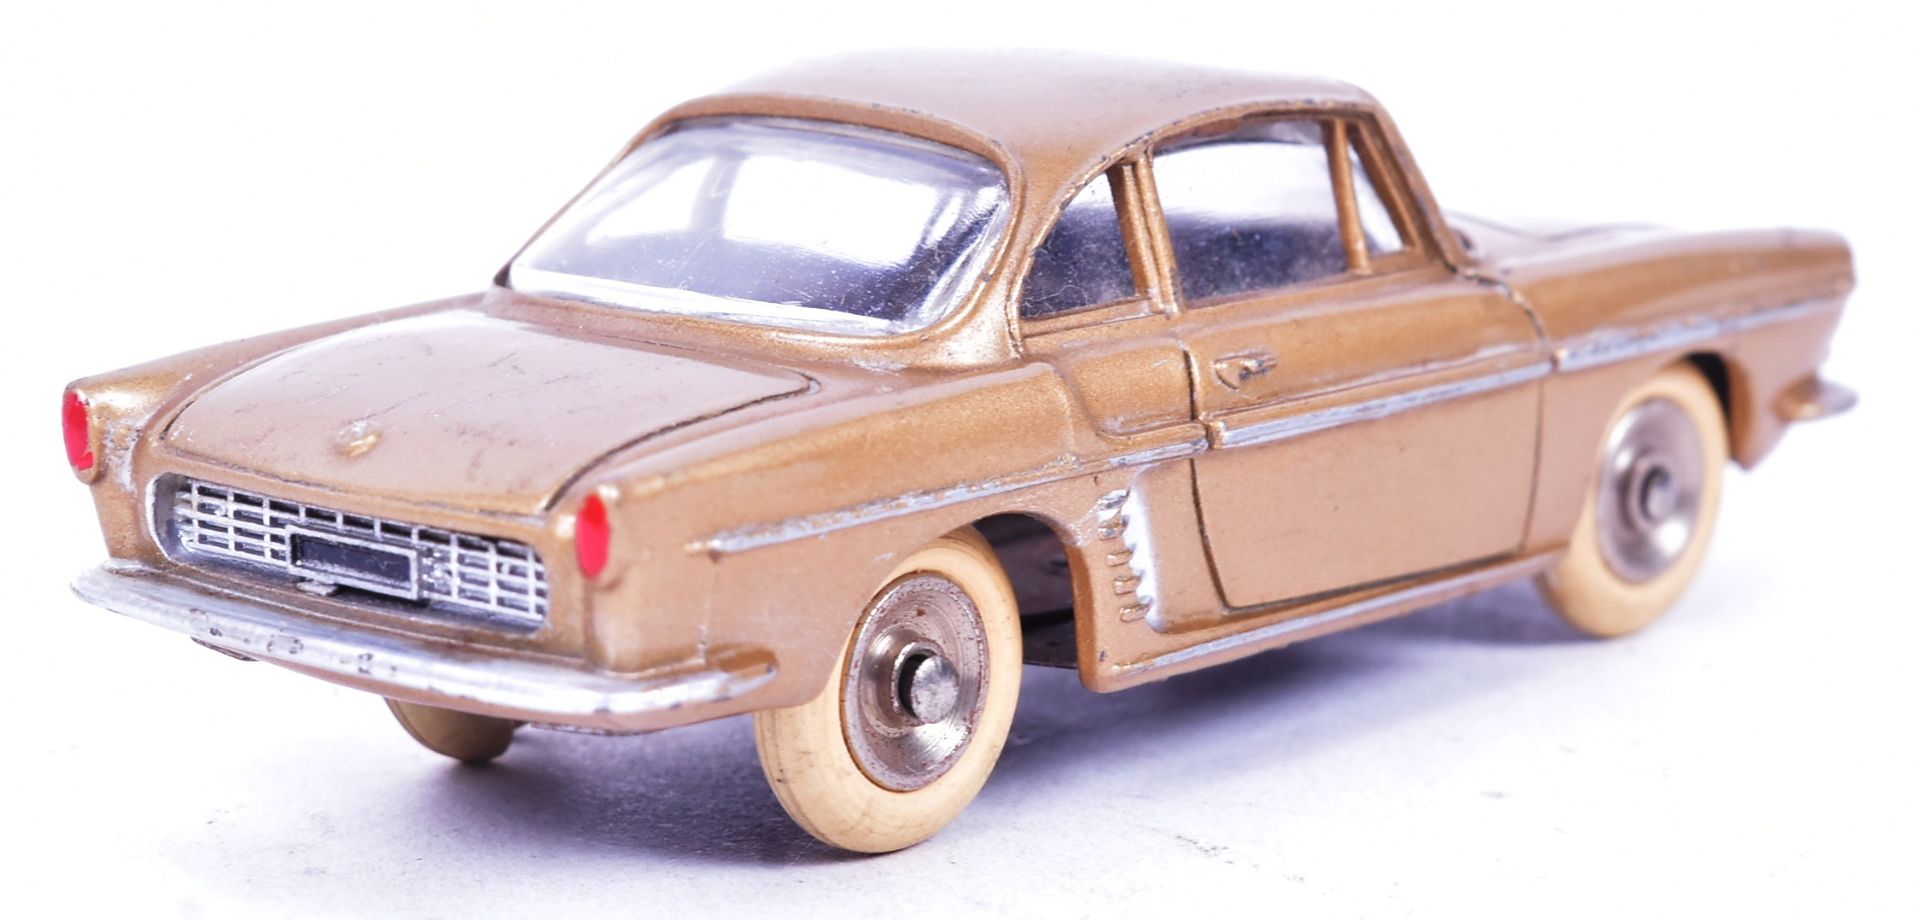 DIECAST - FRENCH DINKY TOYS - RENAULT FLORIDE - Image 3 of 4